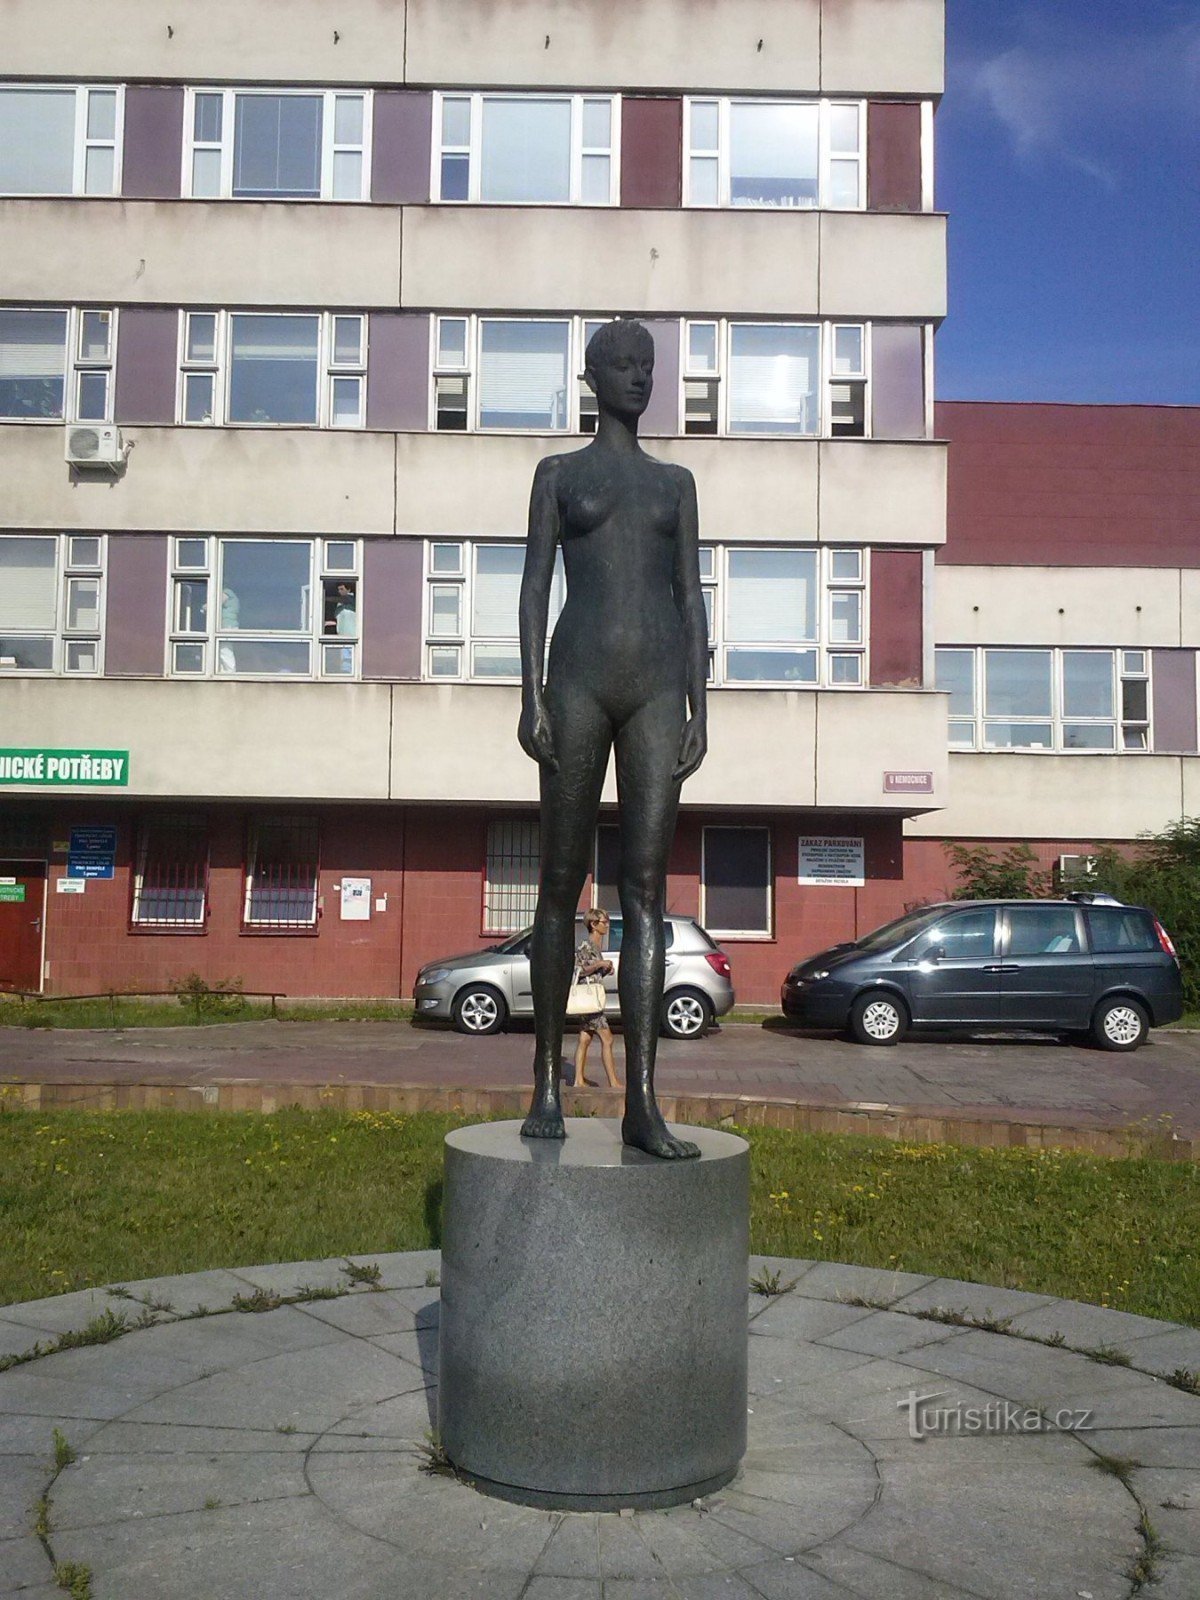 2. The statue in front of the entrance to the polyclinic